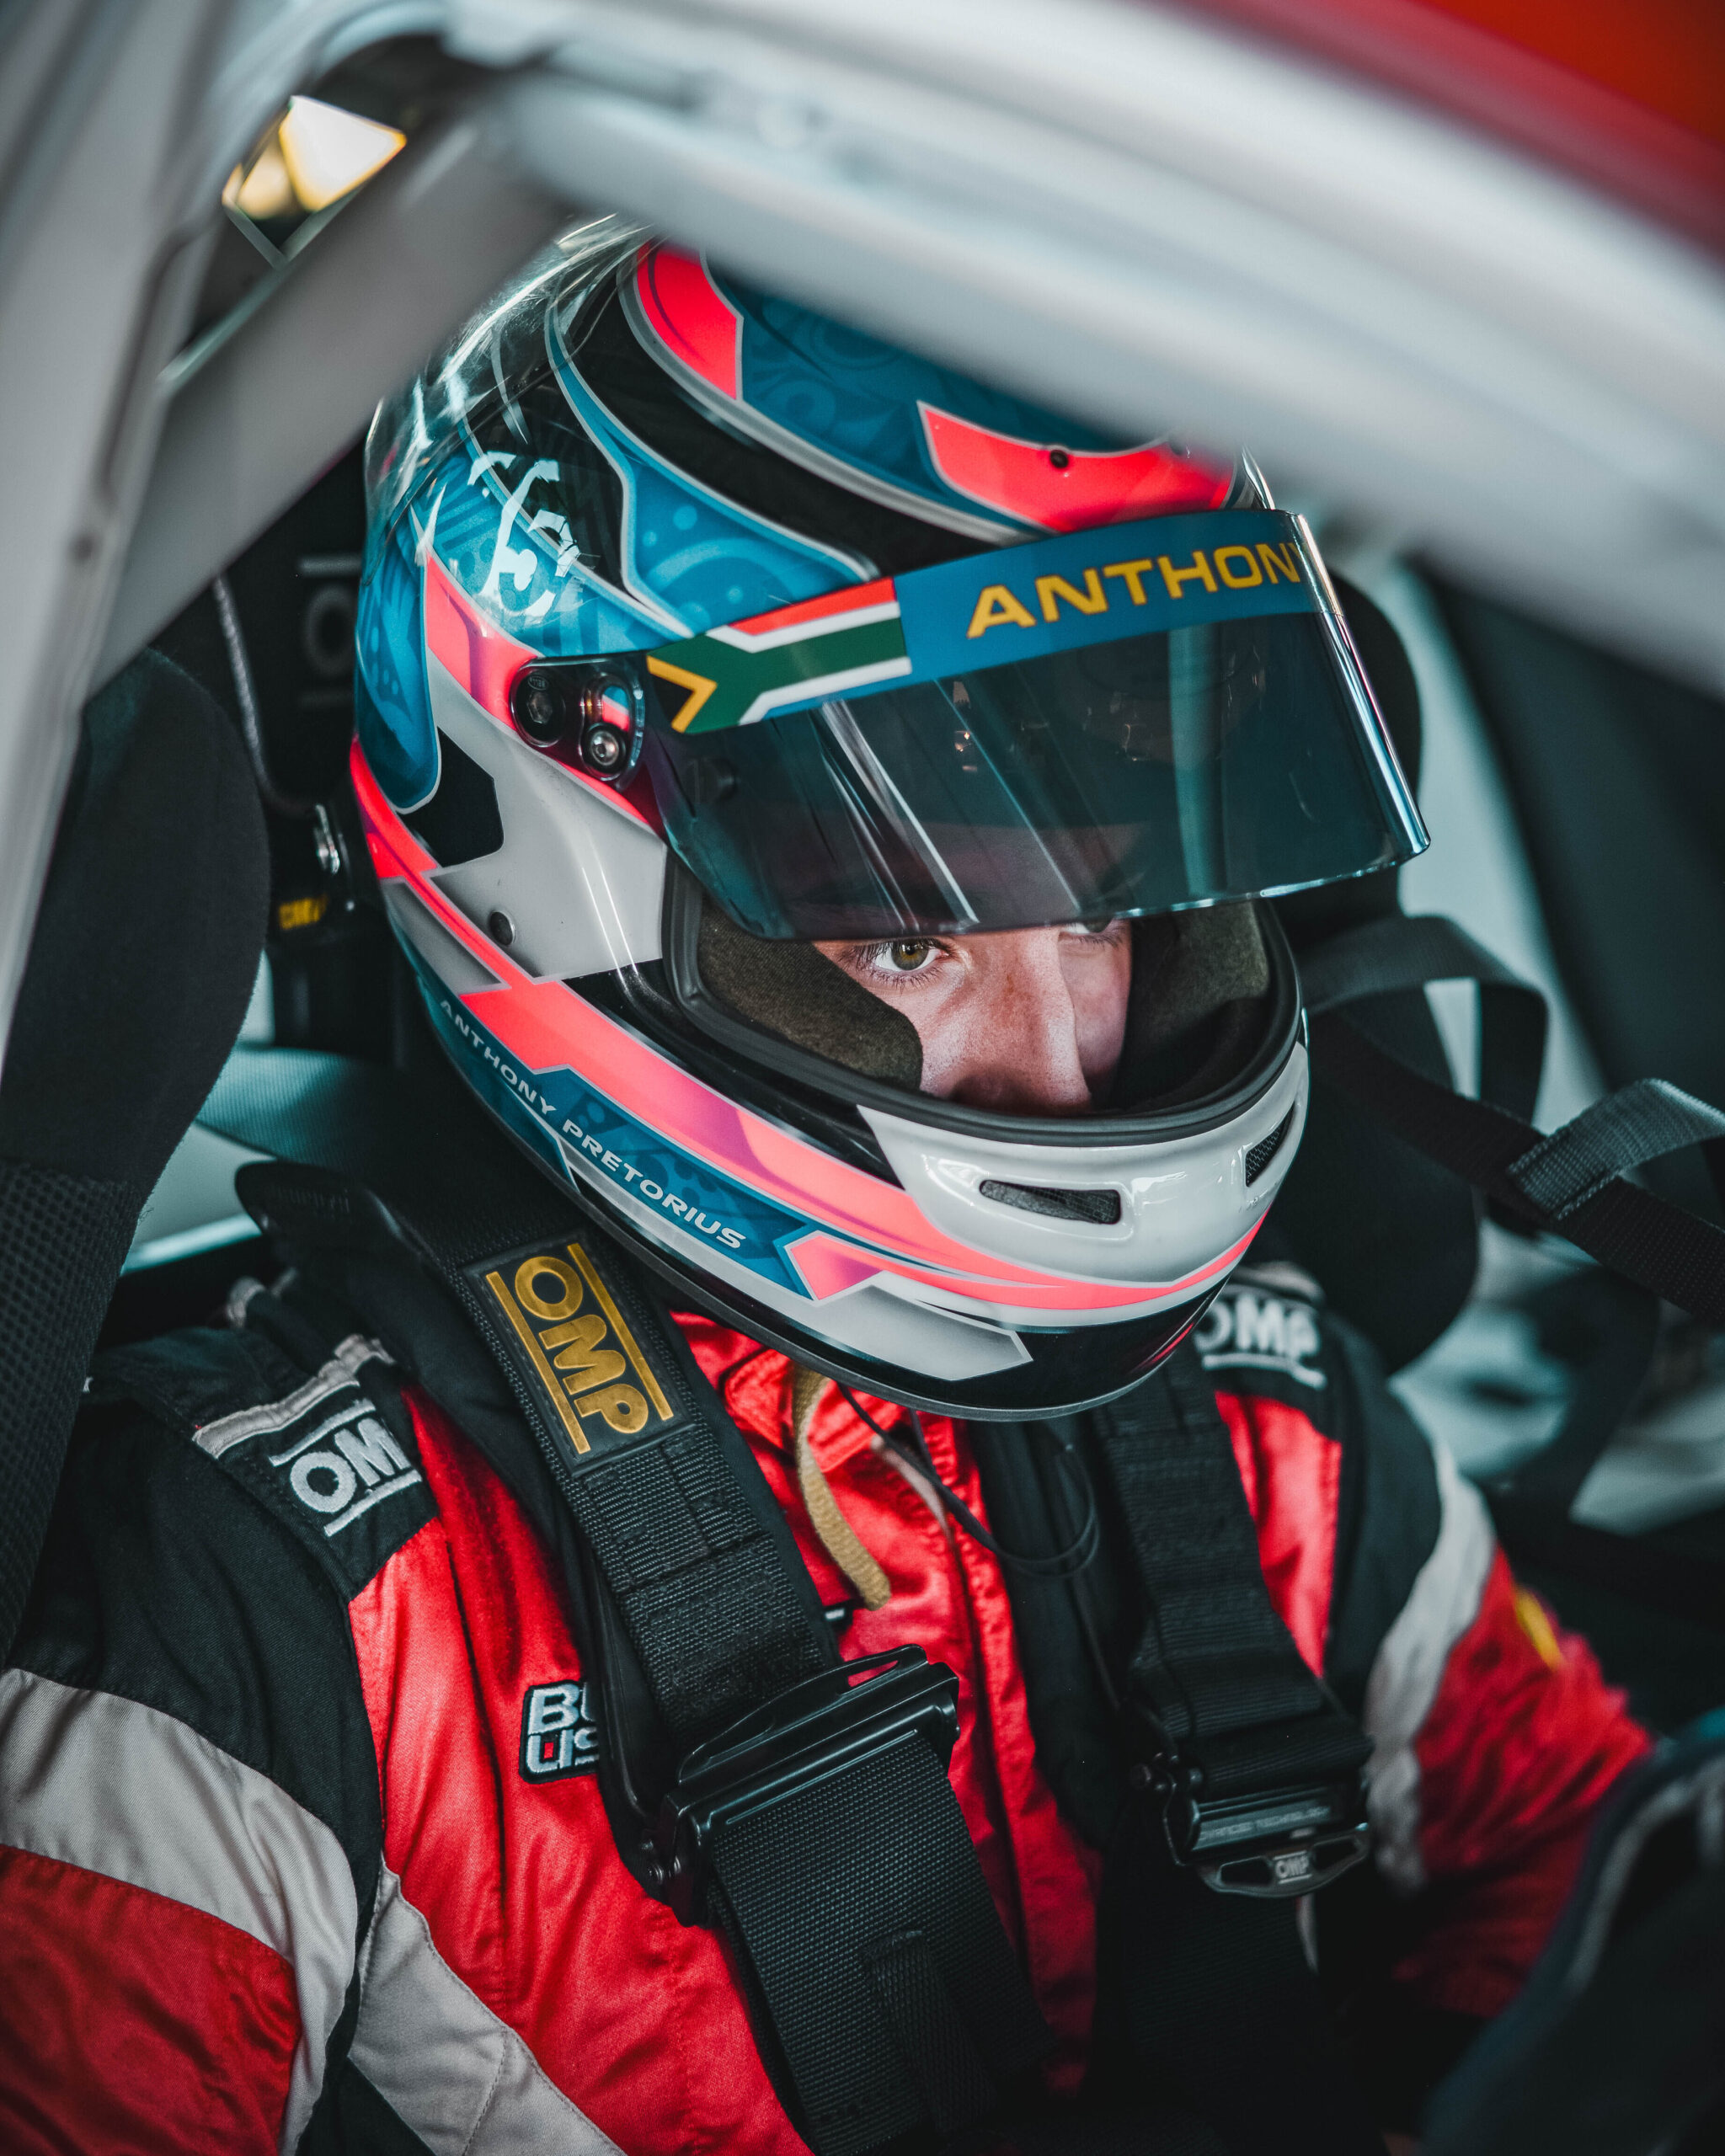 South African Touring Cars' youngest driver, Anthony Pretorius, ready to take to the track